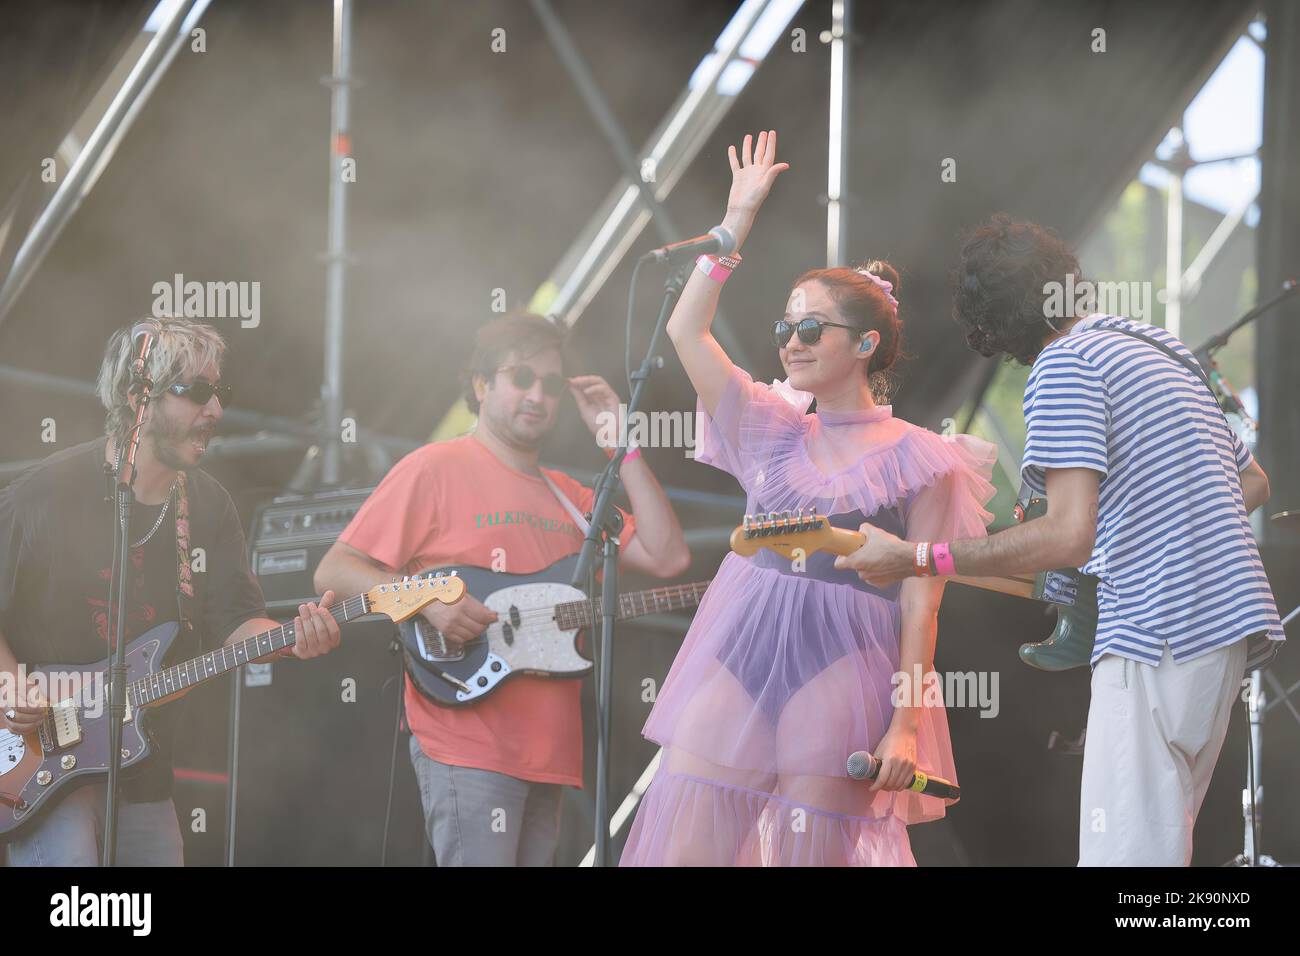 ZARAGOZA, SPAIN - SEP 3: Little Jesus (indie rock band from Mexico) and Ximena Sarinana perform in concert at Vive Latino Festival on September 3, 202 Stock Photo